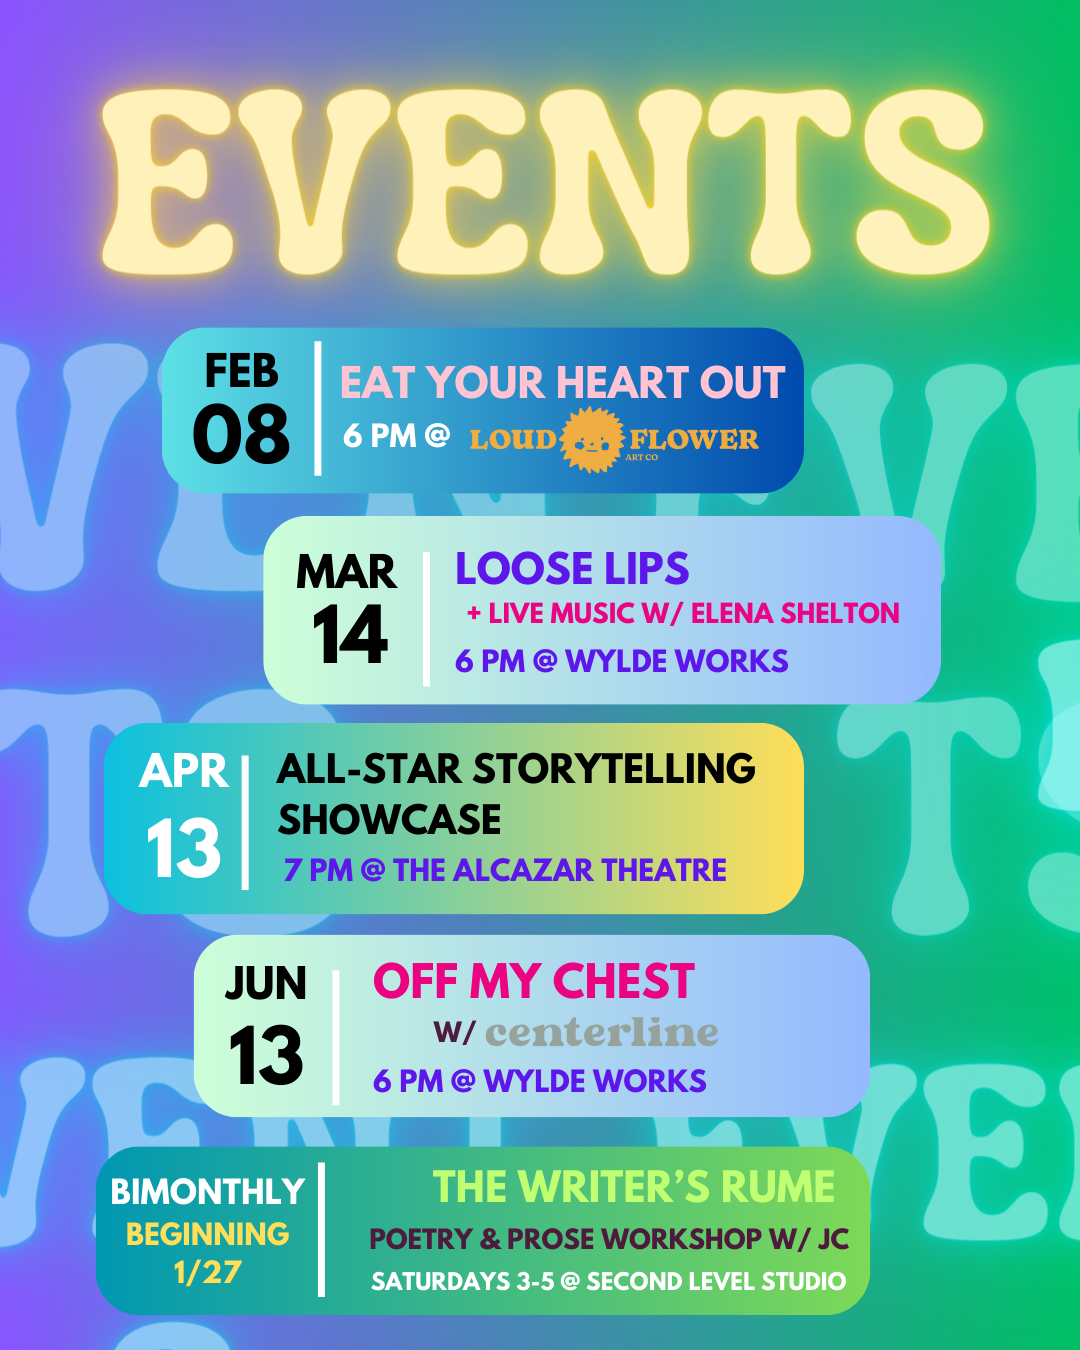 Blue and Light Blue Events List Poster (1080 x 1350 px).png